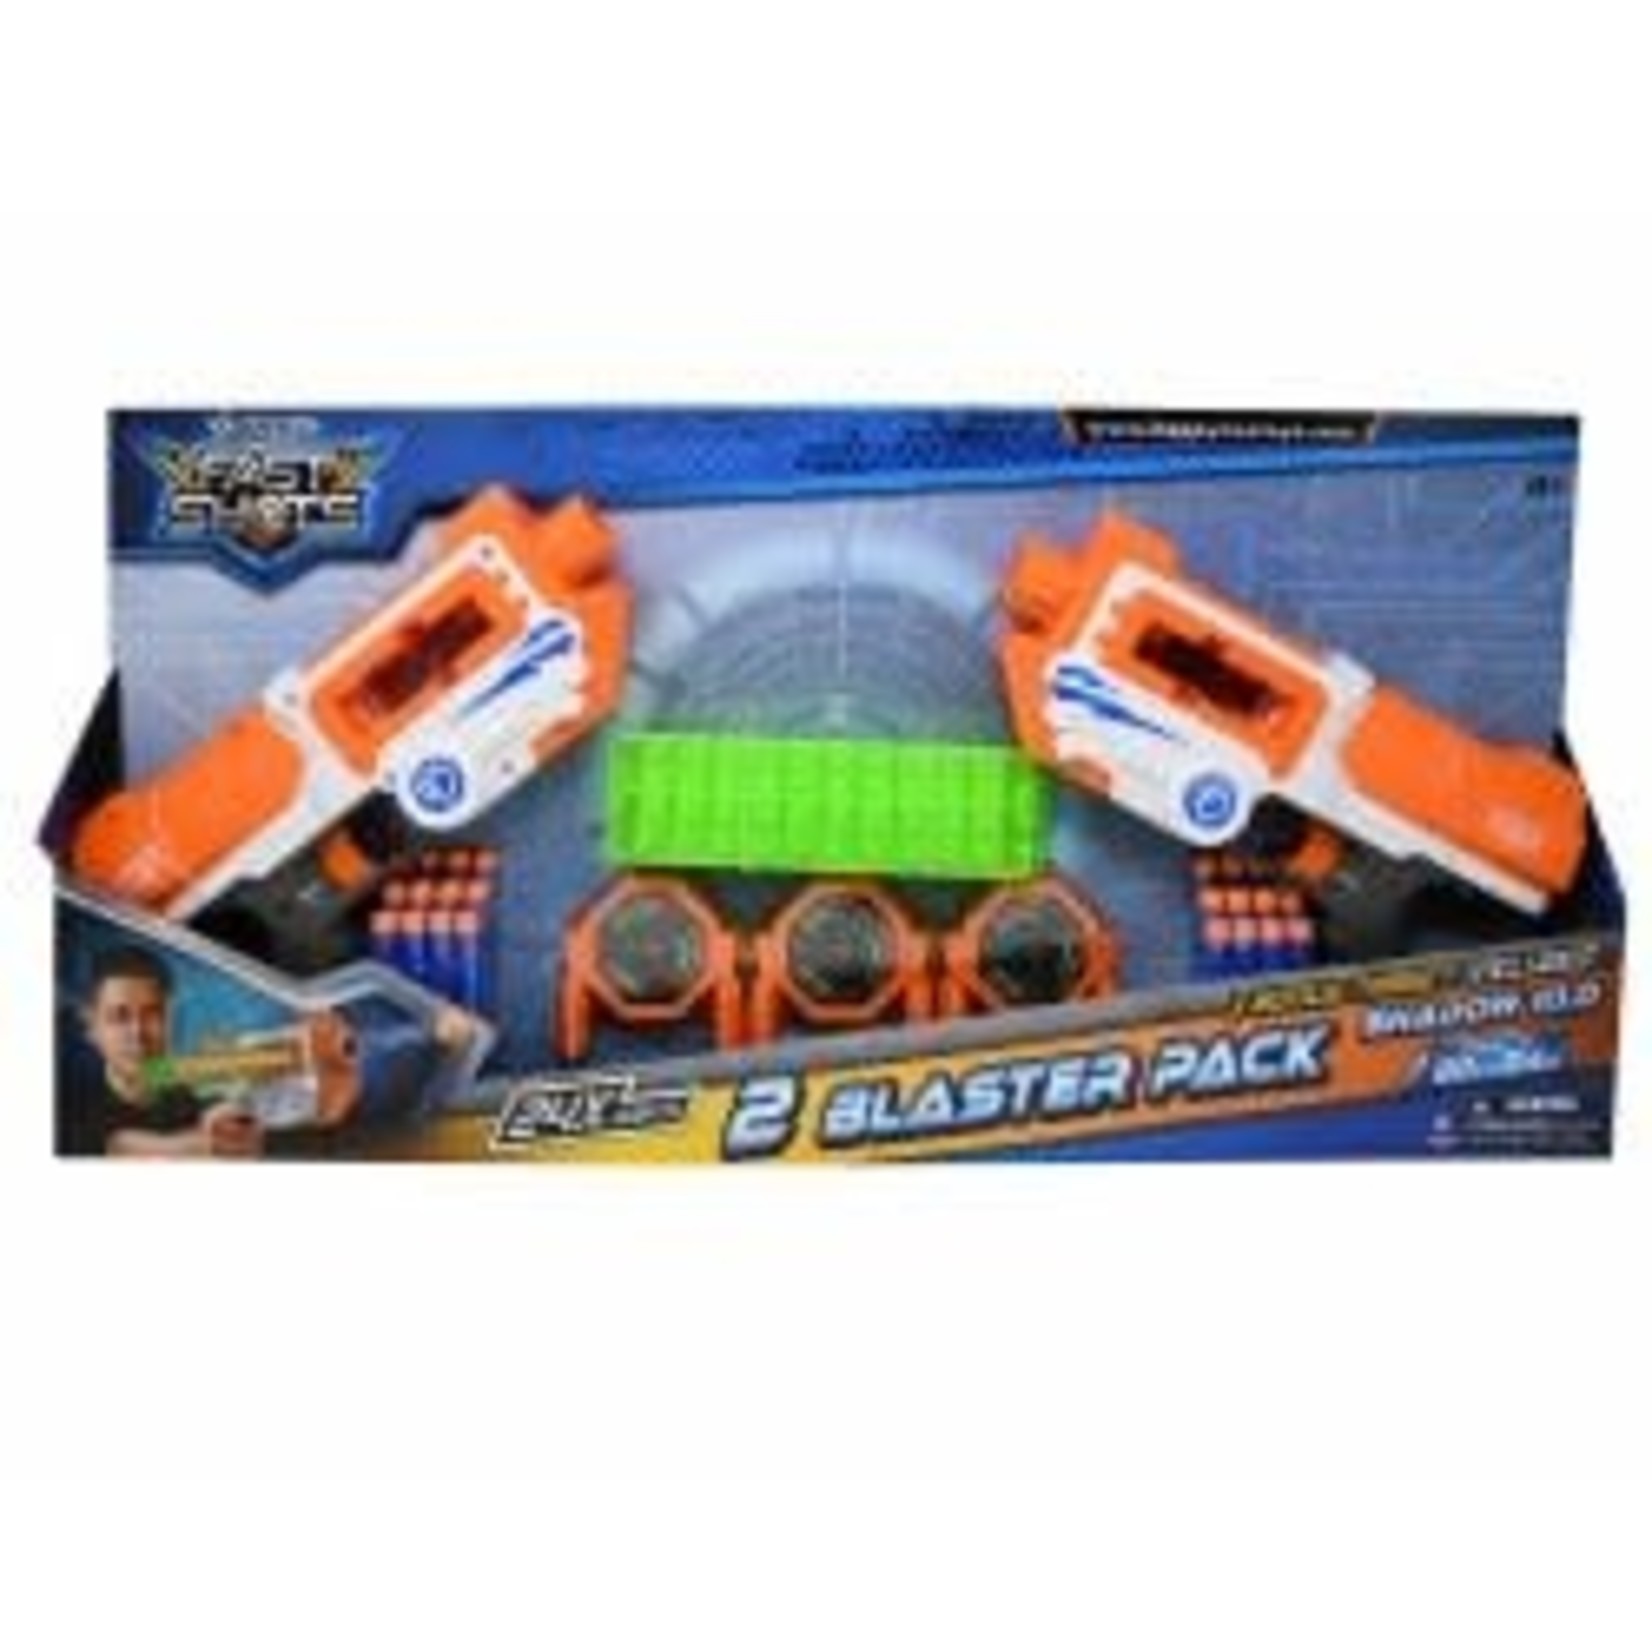 United Pacific Designs Shadow 2pk Blaster Pack with 24 darts, 3 targets